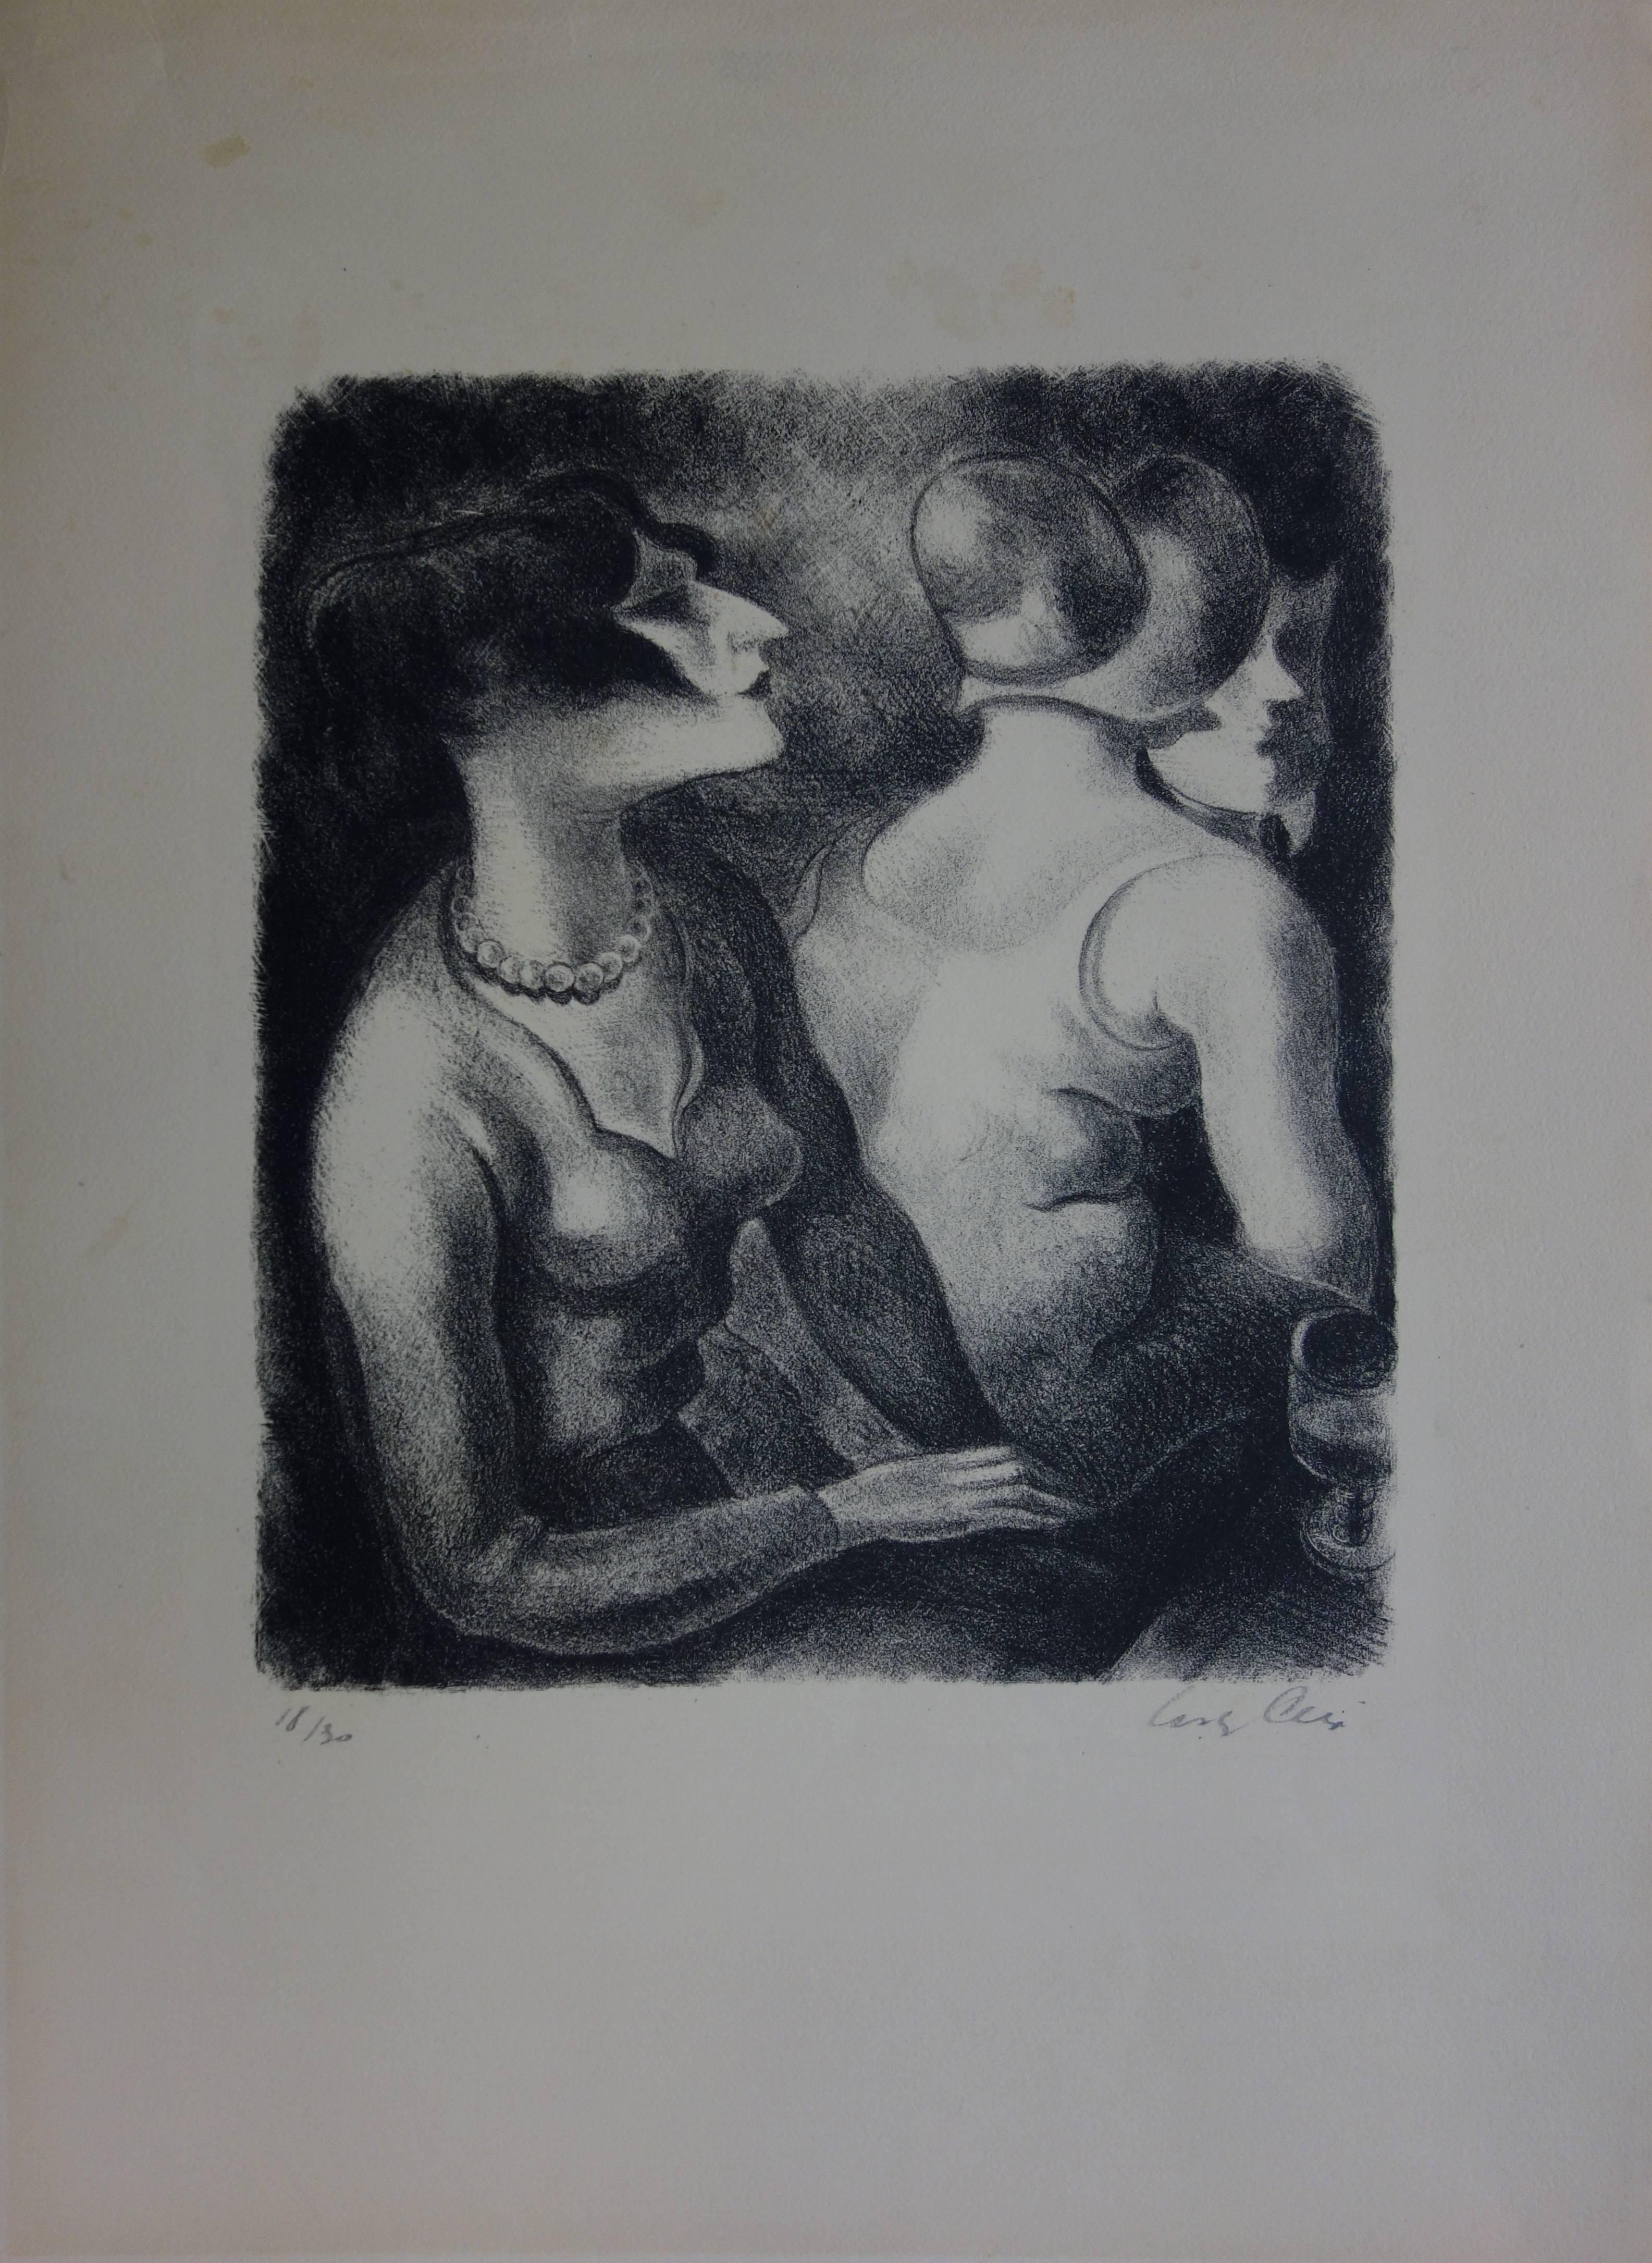 Two Women in a Coffee Shop - Handsigned original lithograph